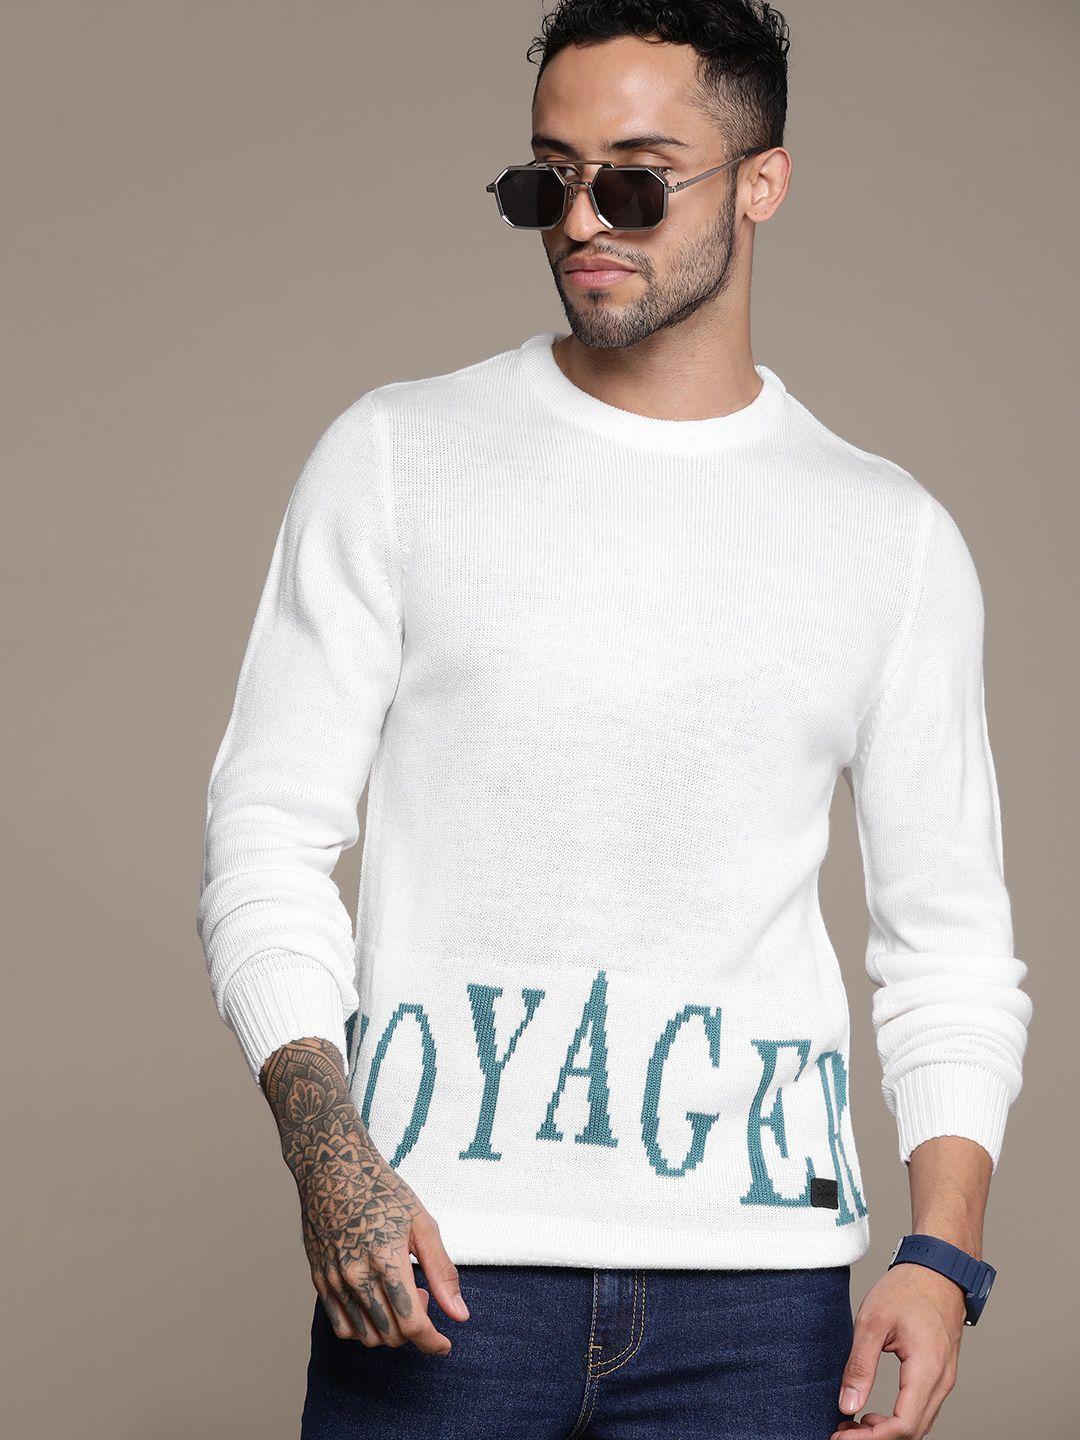 roadster men typography printed pullover sweater